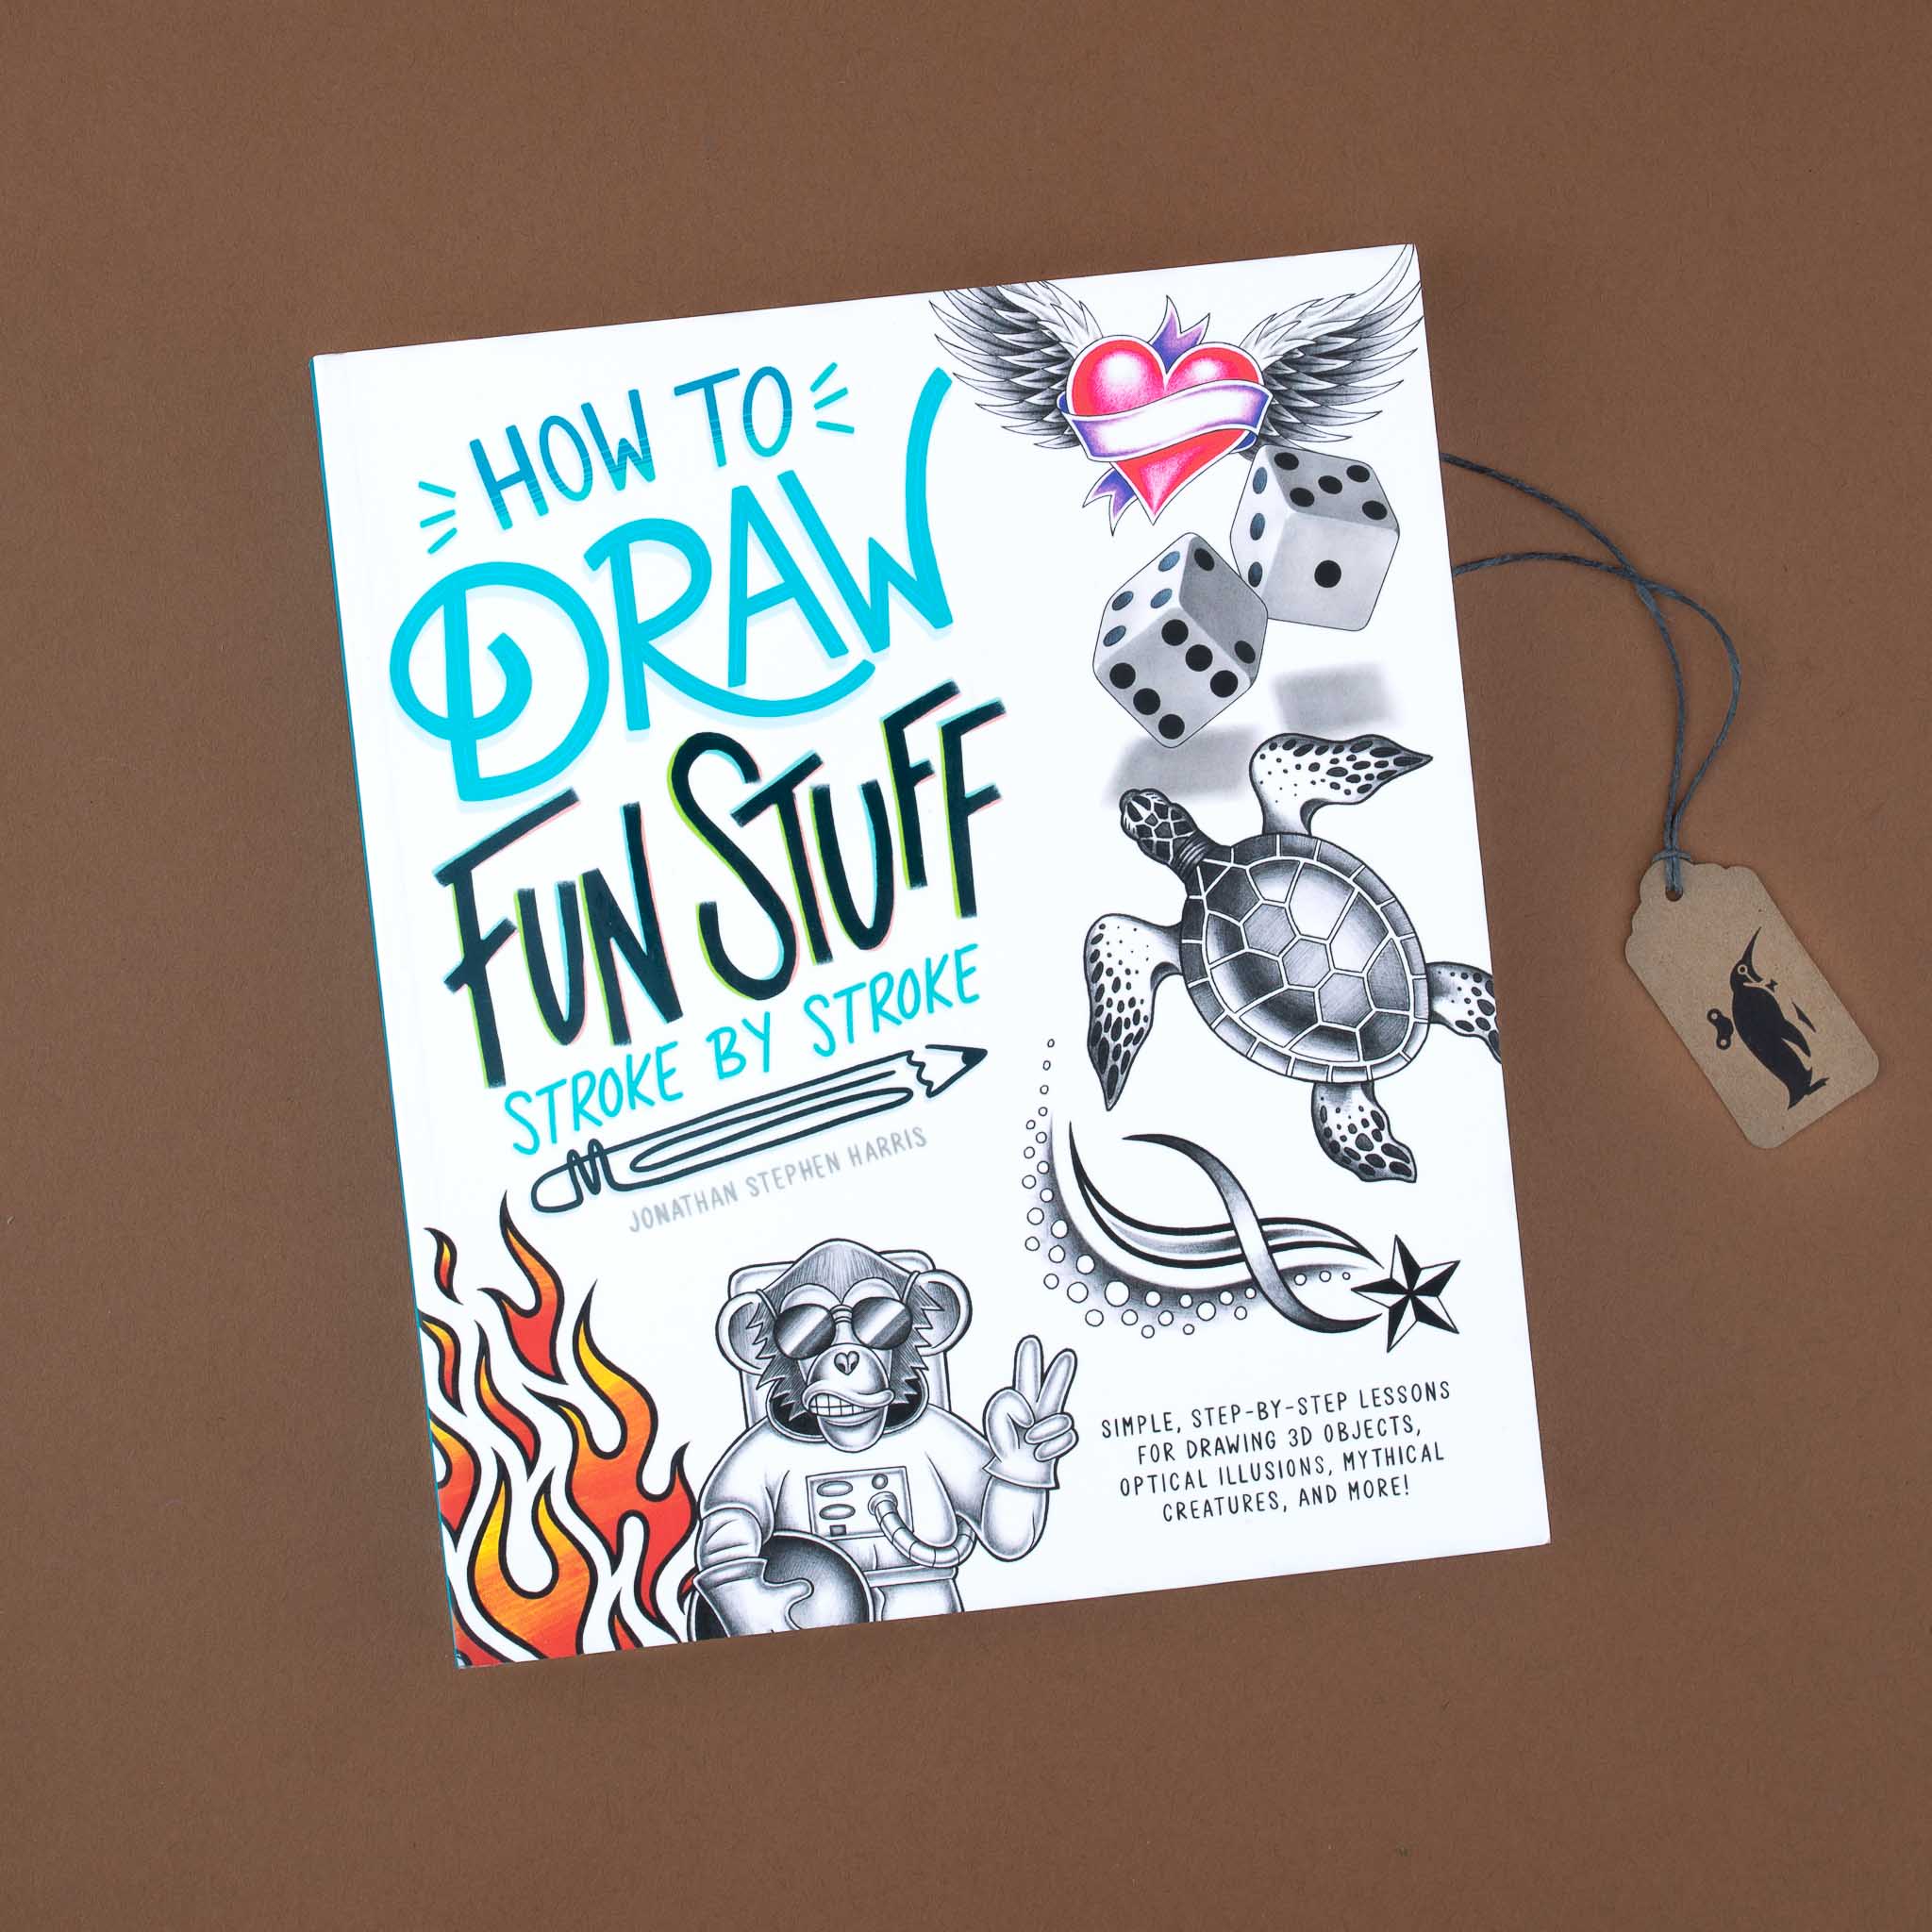 cool 3d drawing ideas for beginners